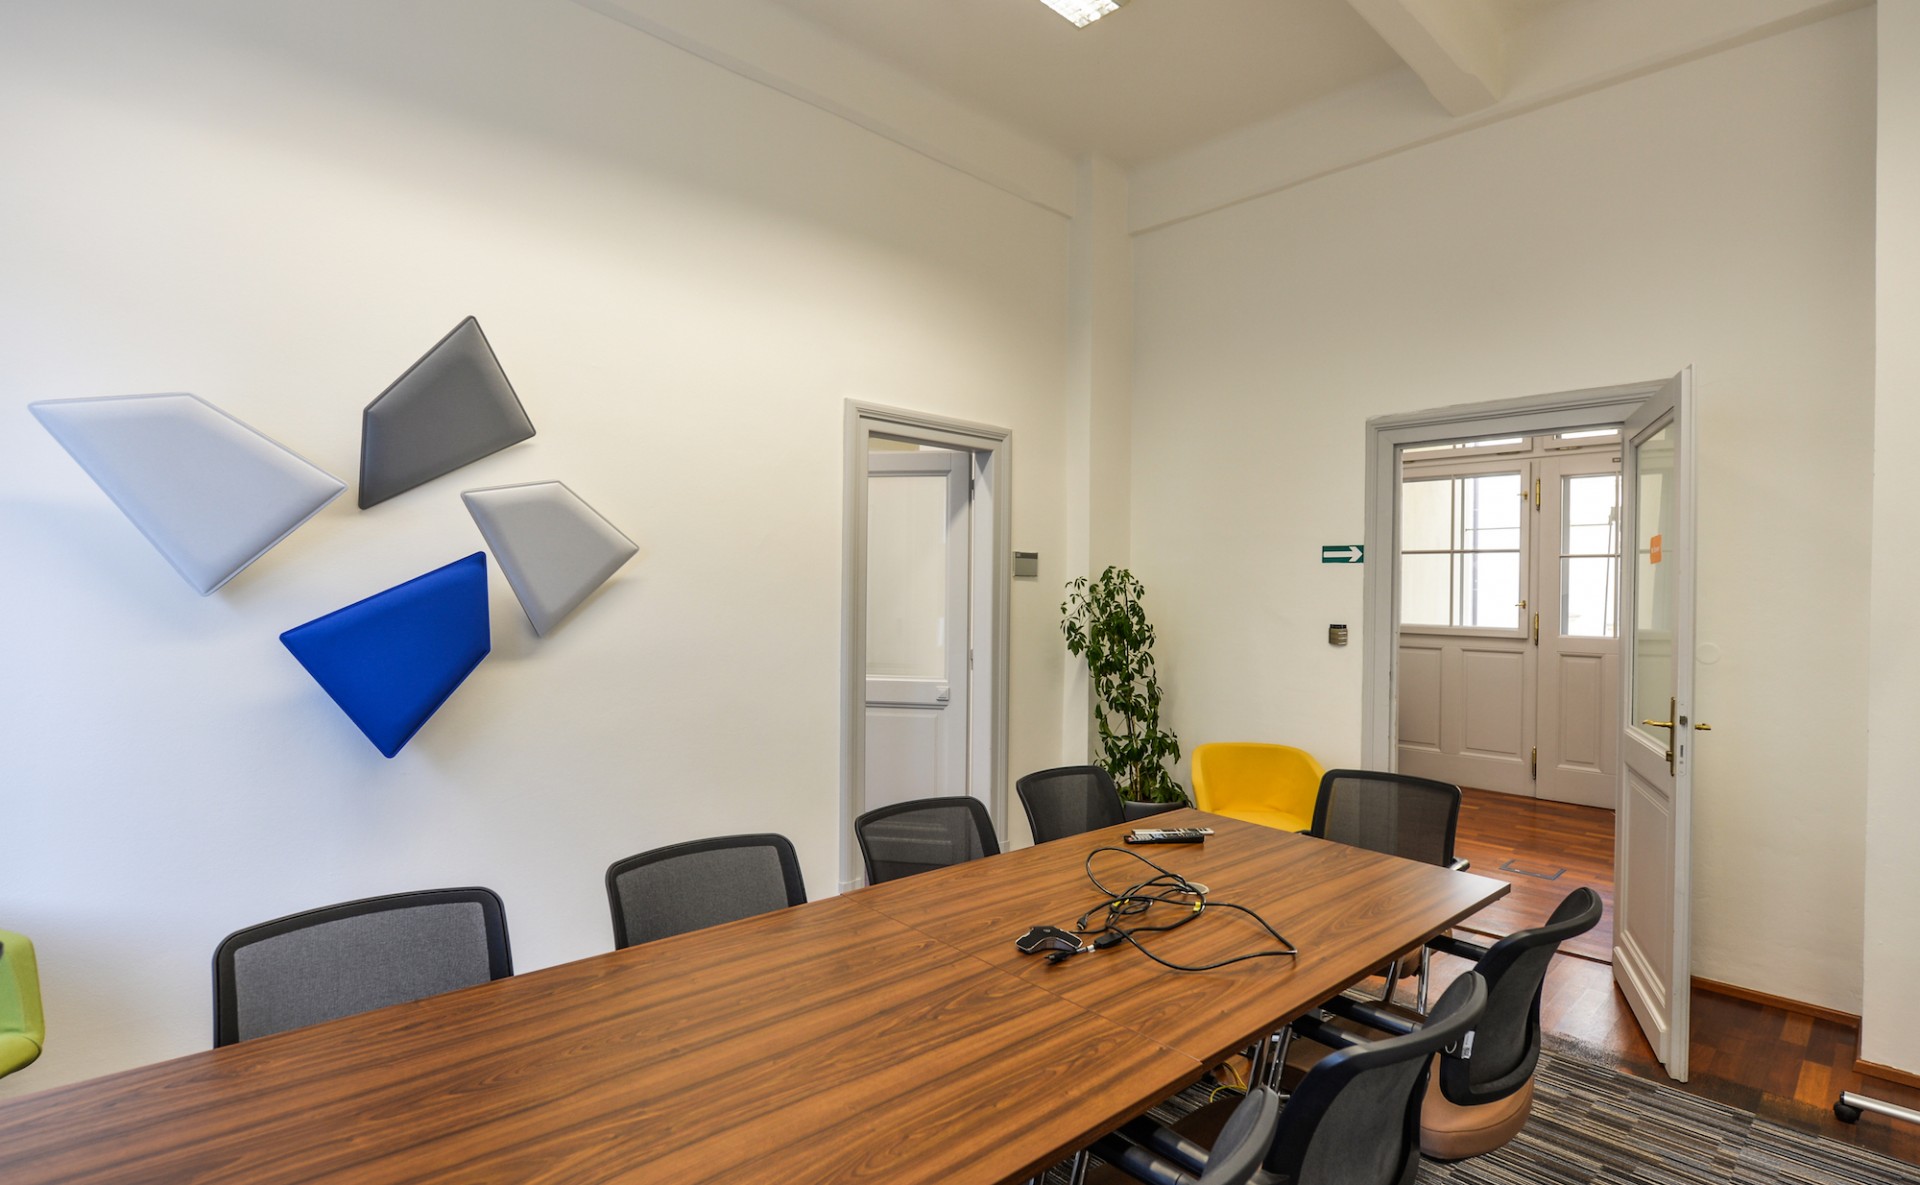 Offices for rent Prague 1